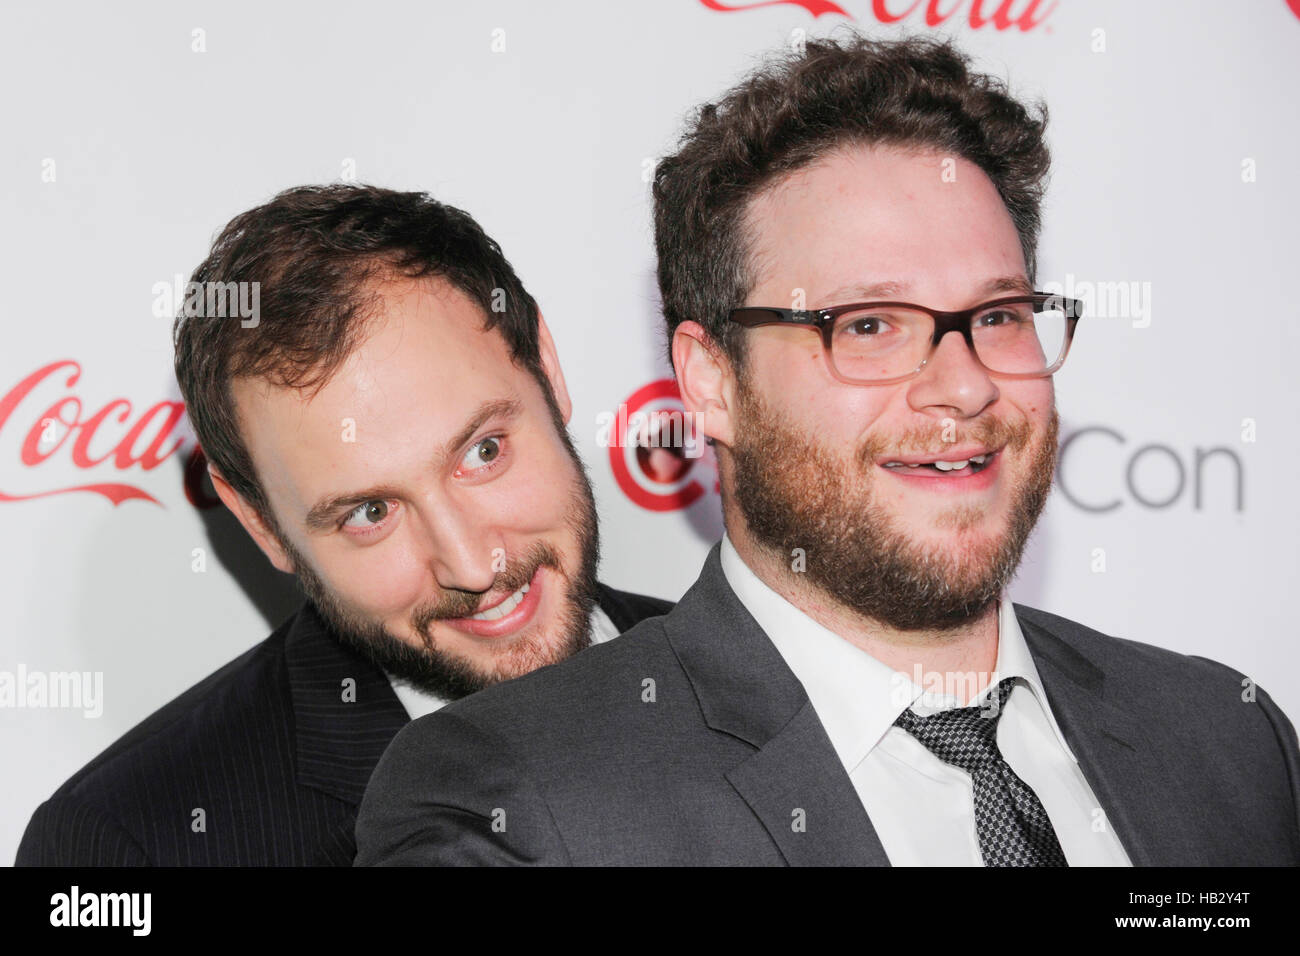 Comedy Filmmakers of the Year award winners Evan Goldberg (L) and Seth Rogen attend The CinemaCon Big Screen Achievement Awards brought to you by The Coca-Cola Company during CinemaCon, the official convention of the National Association of Theatre Owners Stock Photo